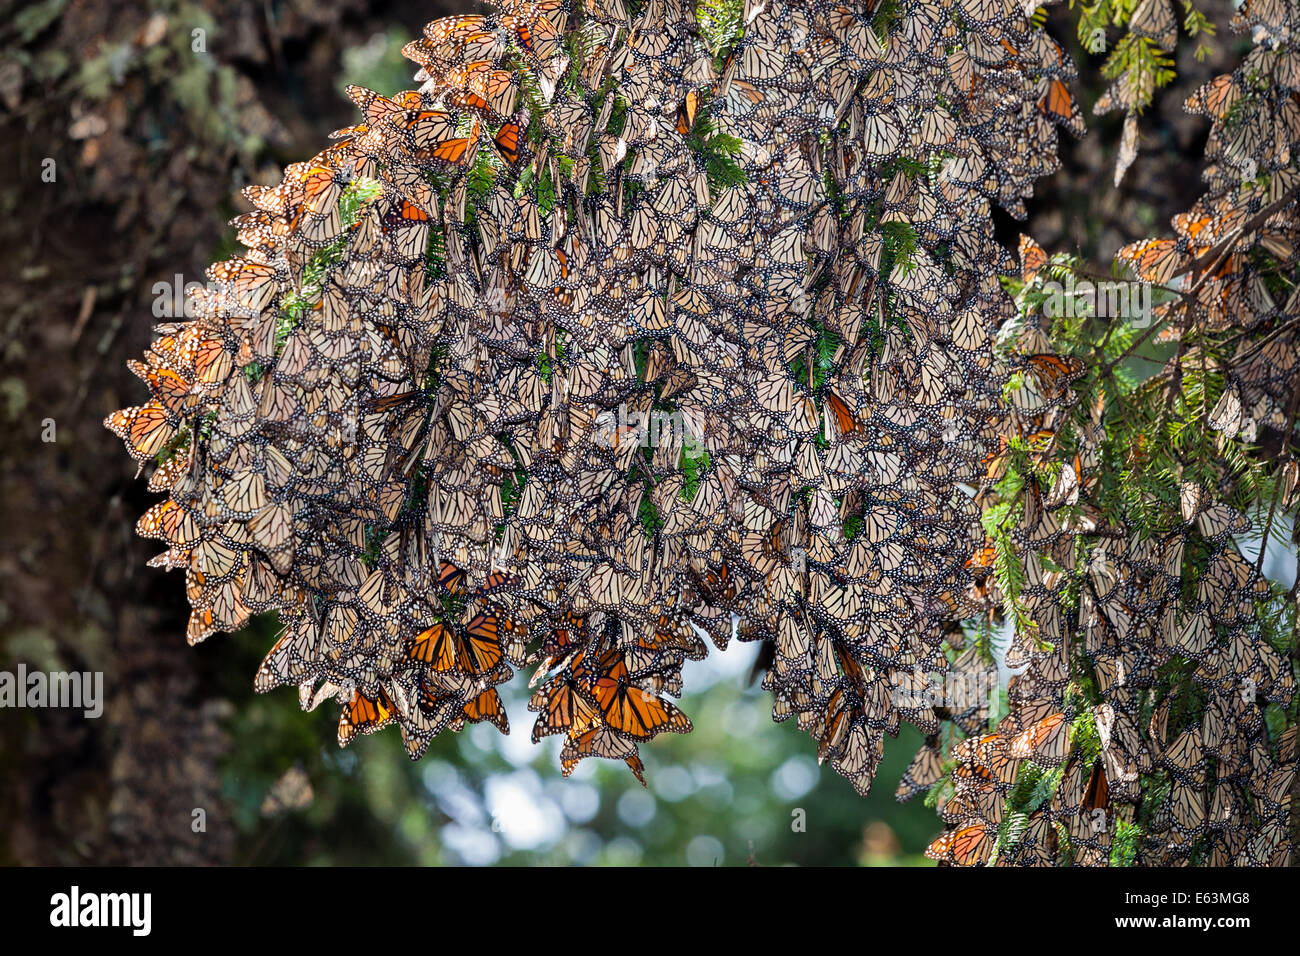 Hundredes of monach butterflies cling to an oyamel fir tree in the Rosario Sanctuary, Michoacan, Mexico. Stock Photo